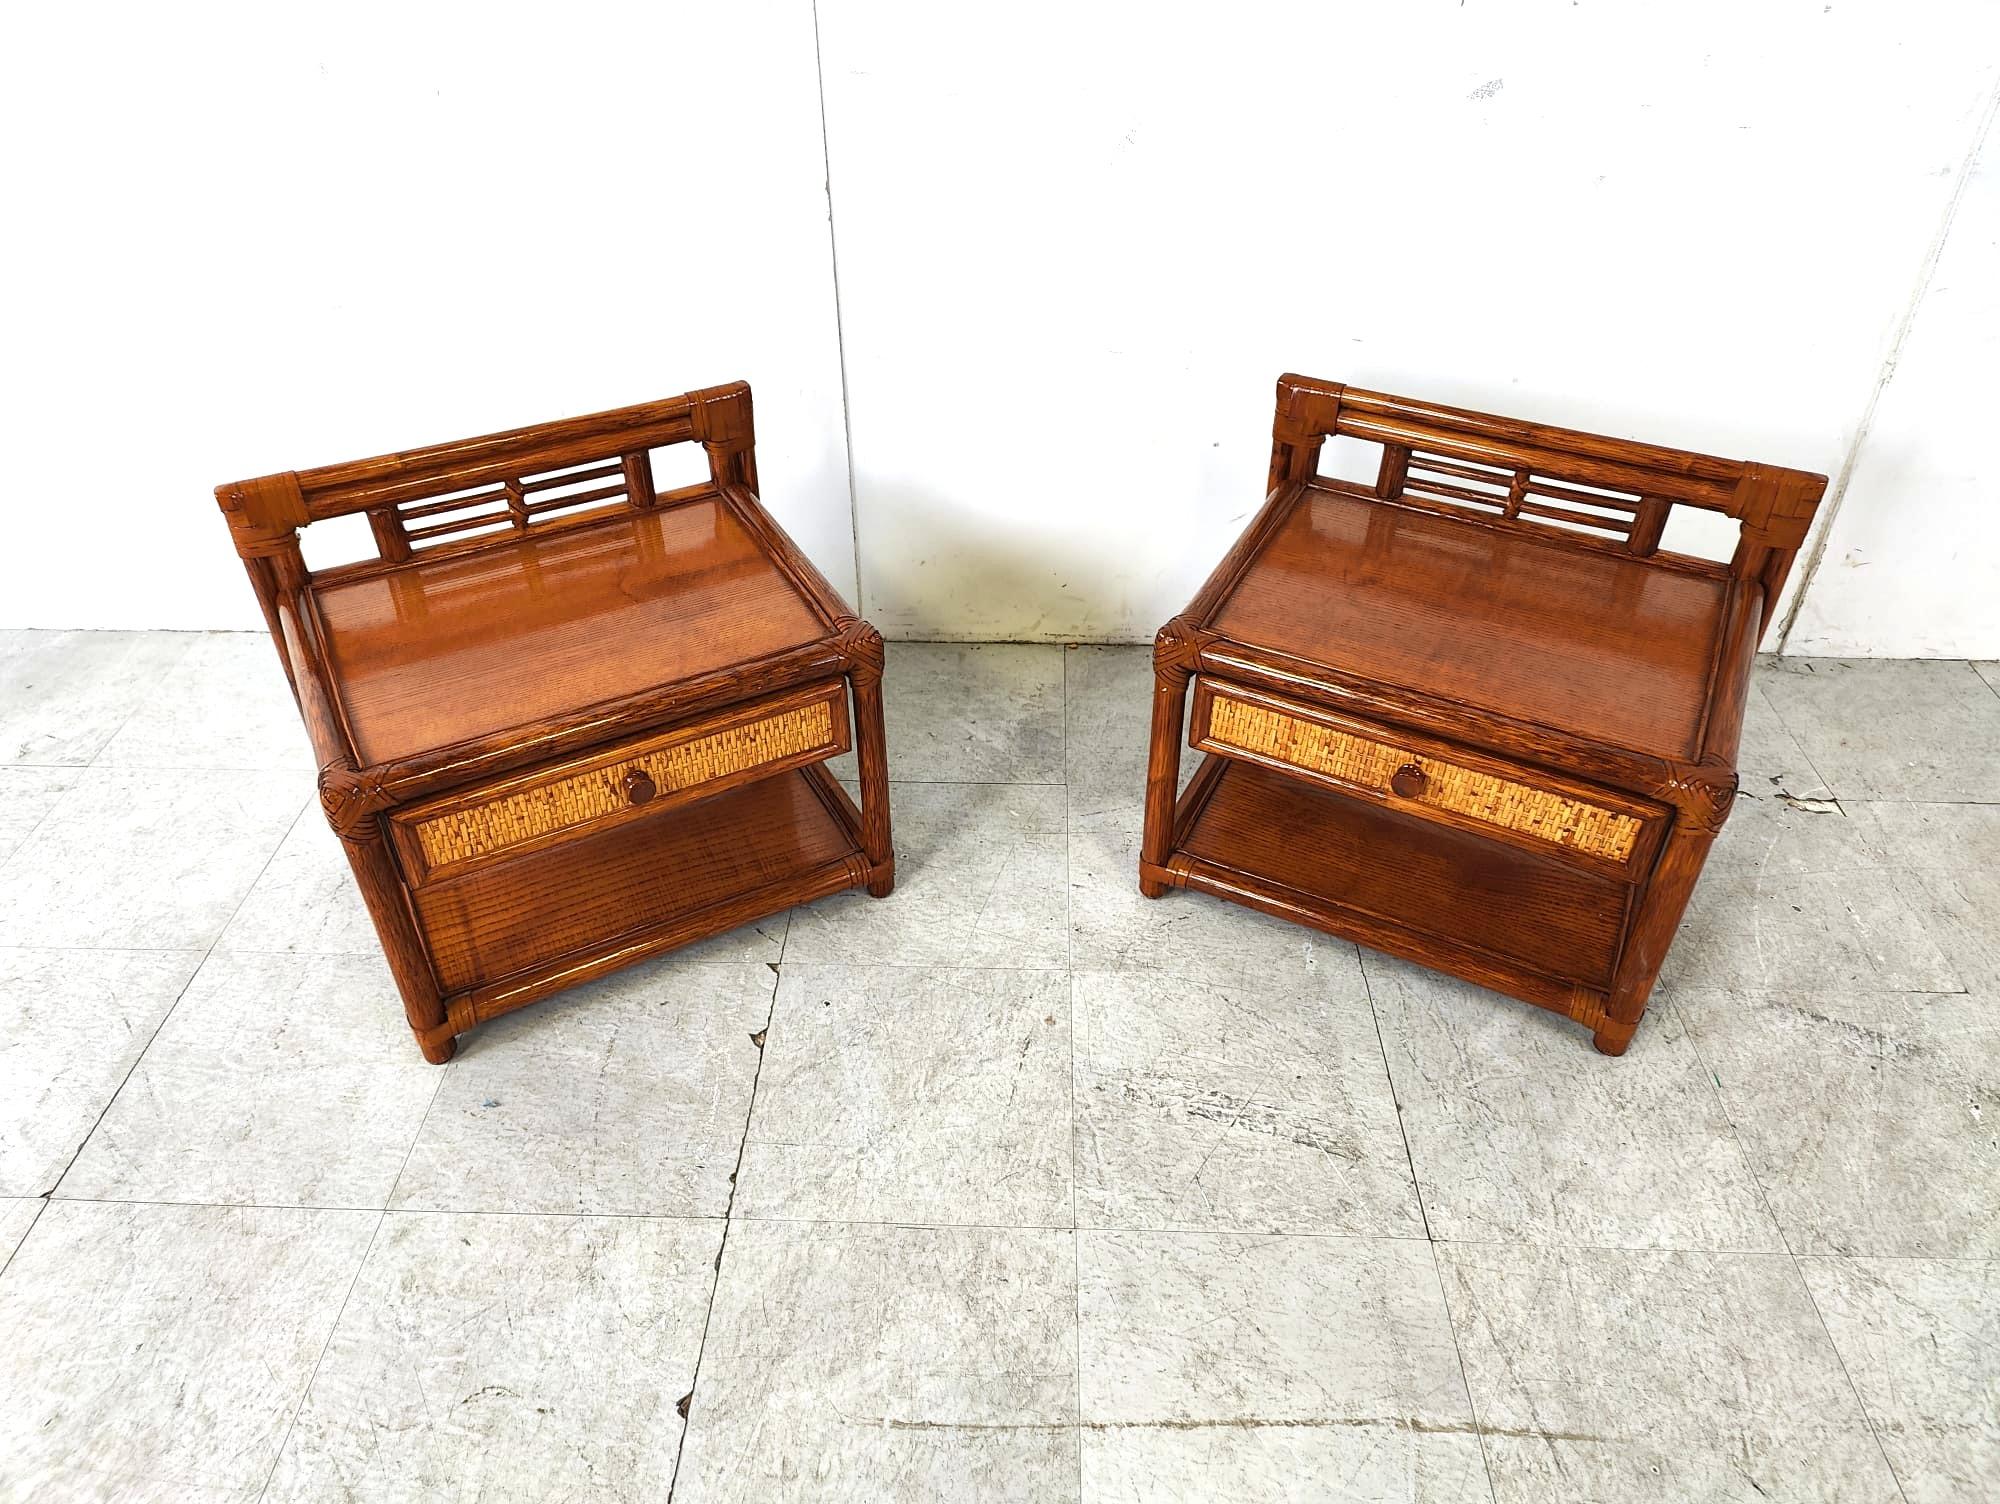 Vintage bedside cabinets with a drawer and lower shelf made from bamboo and rattan by French high end furniture make Maugrion.

Very good condition

1970s - France

Dimensions:
Height: 46cm
Width: 55cm
Depth: 40cm

Ref.: 4521544